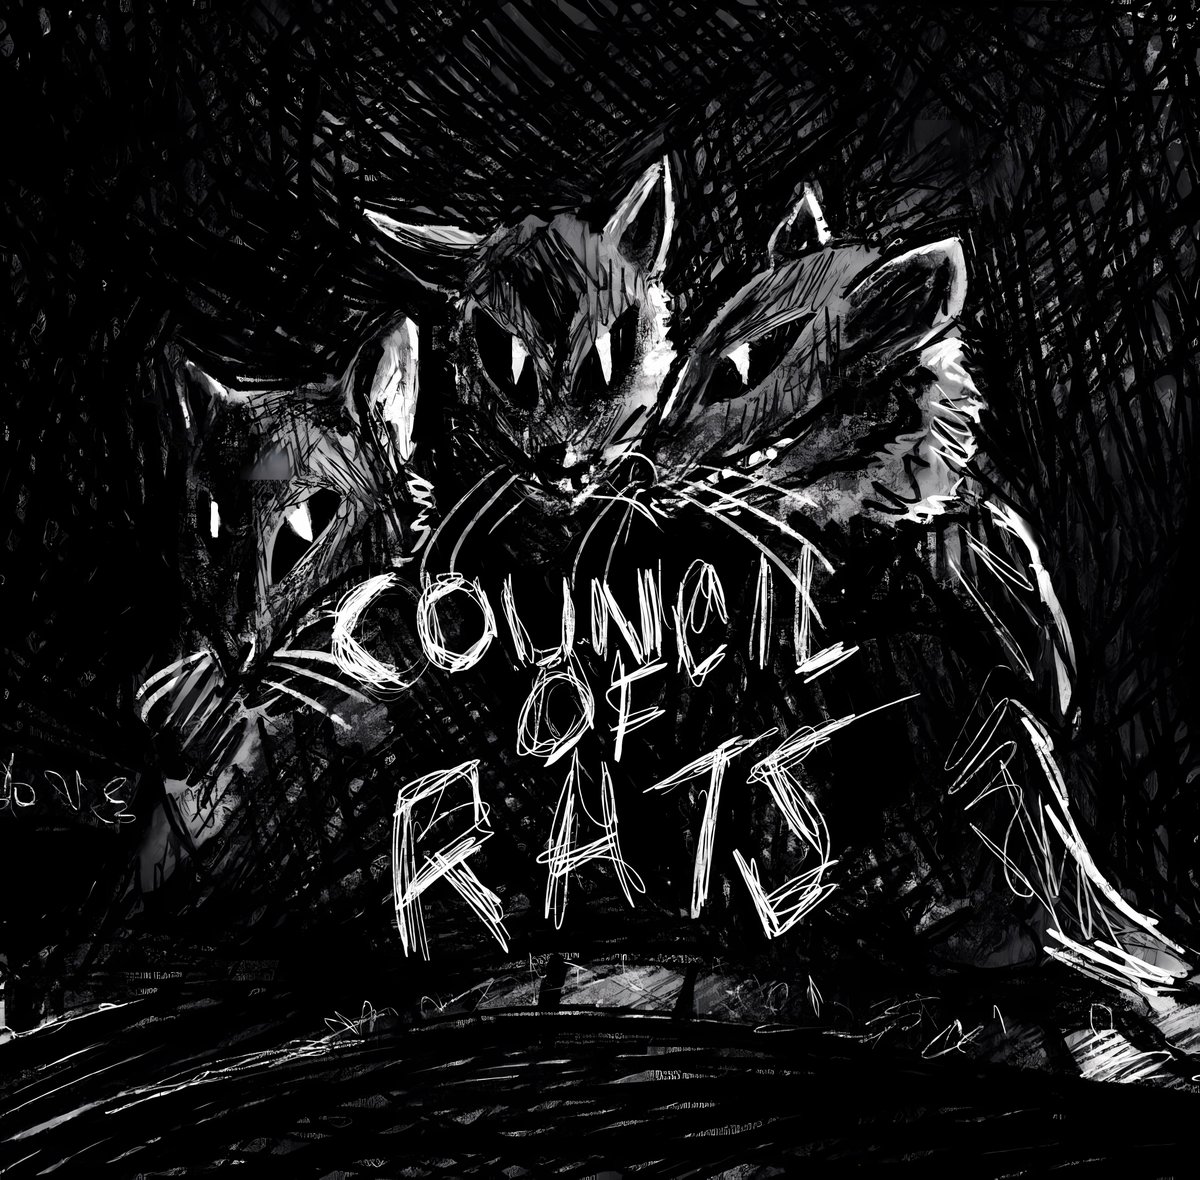 Tomorrow, 'The Council of Rats' goes live!